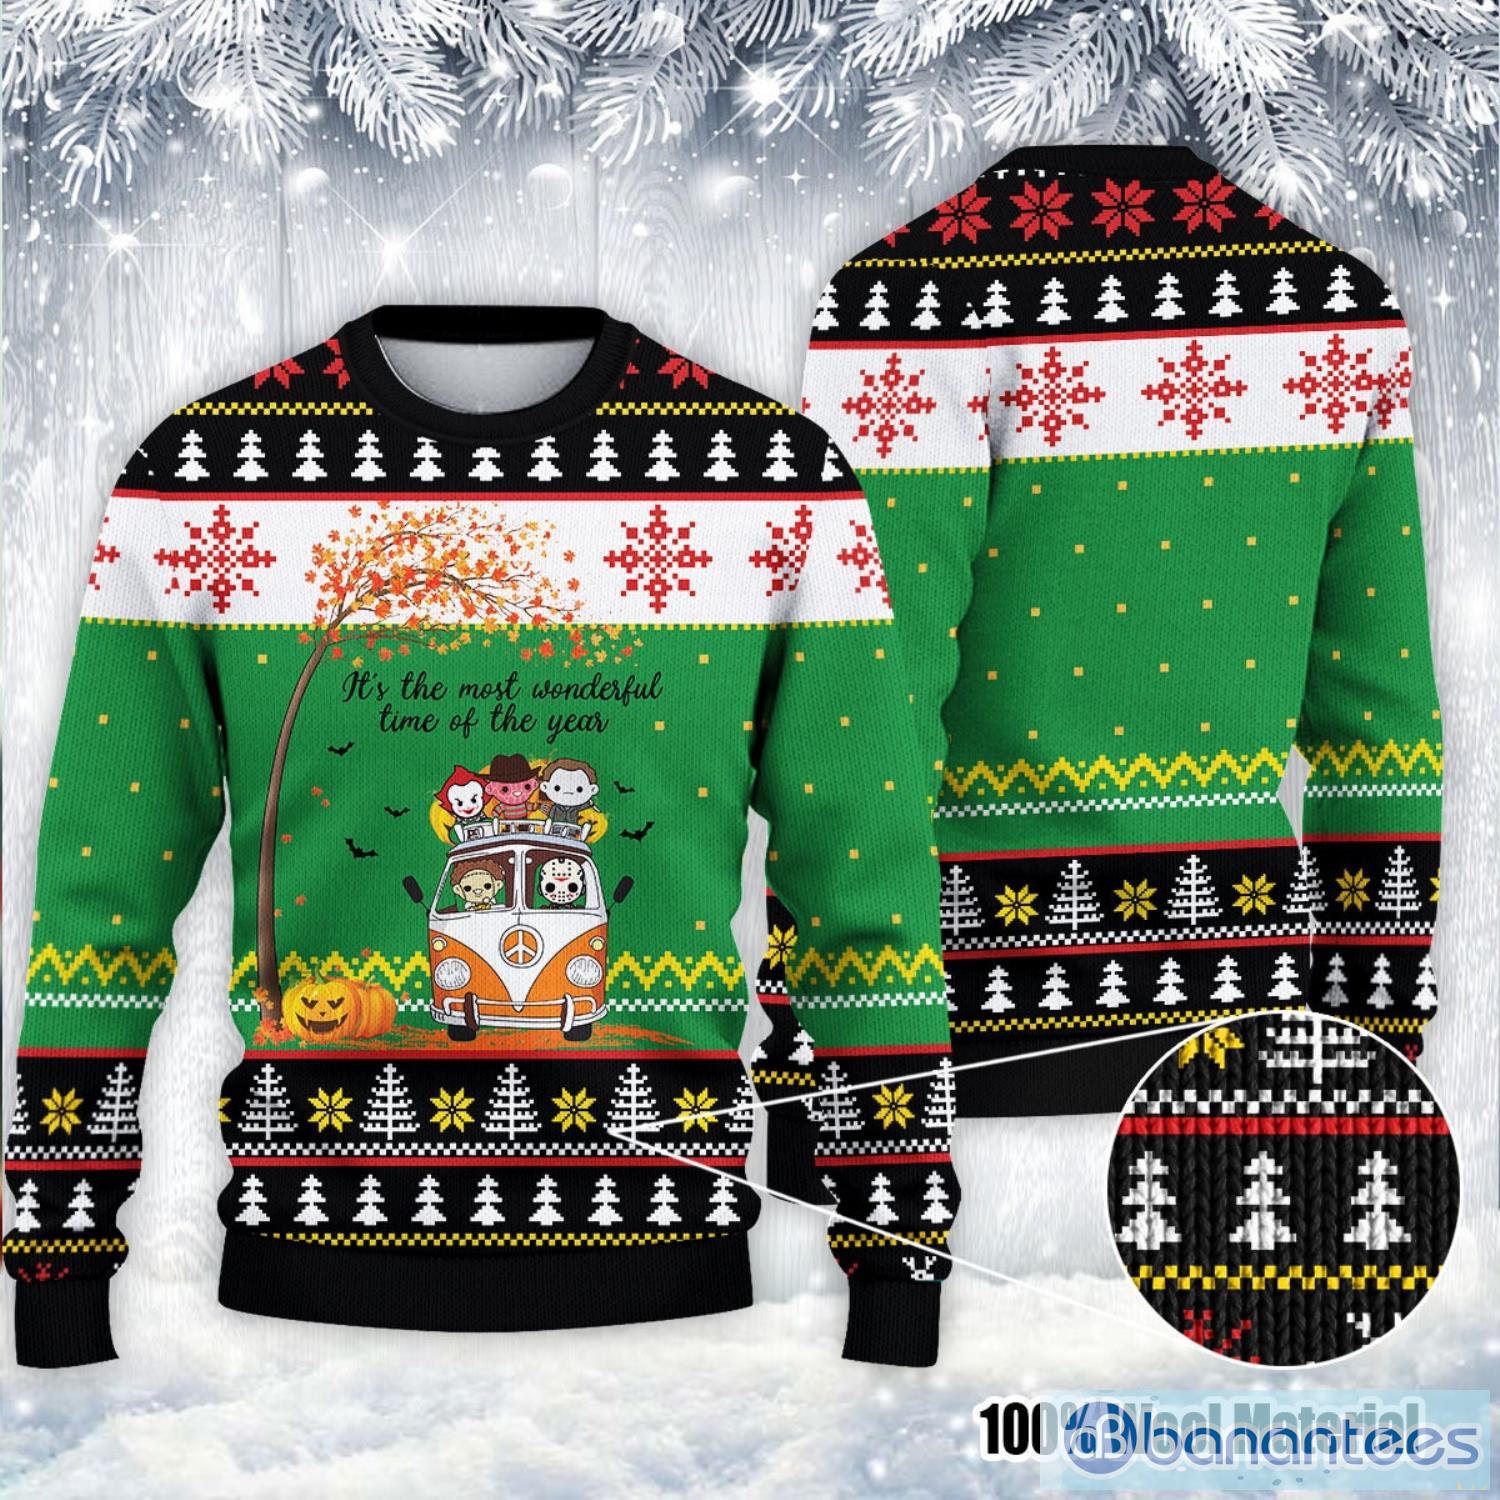 It's The Most Wonderful Time Of The Year Ugly Christmas Sweater Halloween Christmas Sweater Product Photo 1